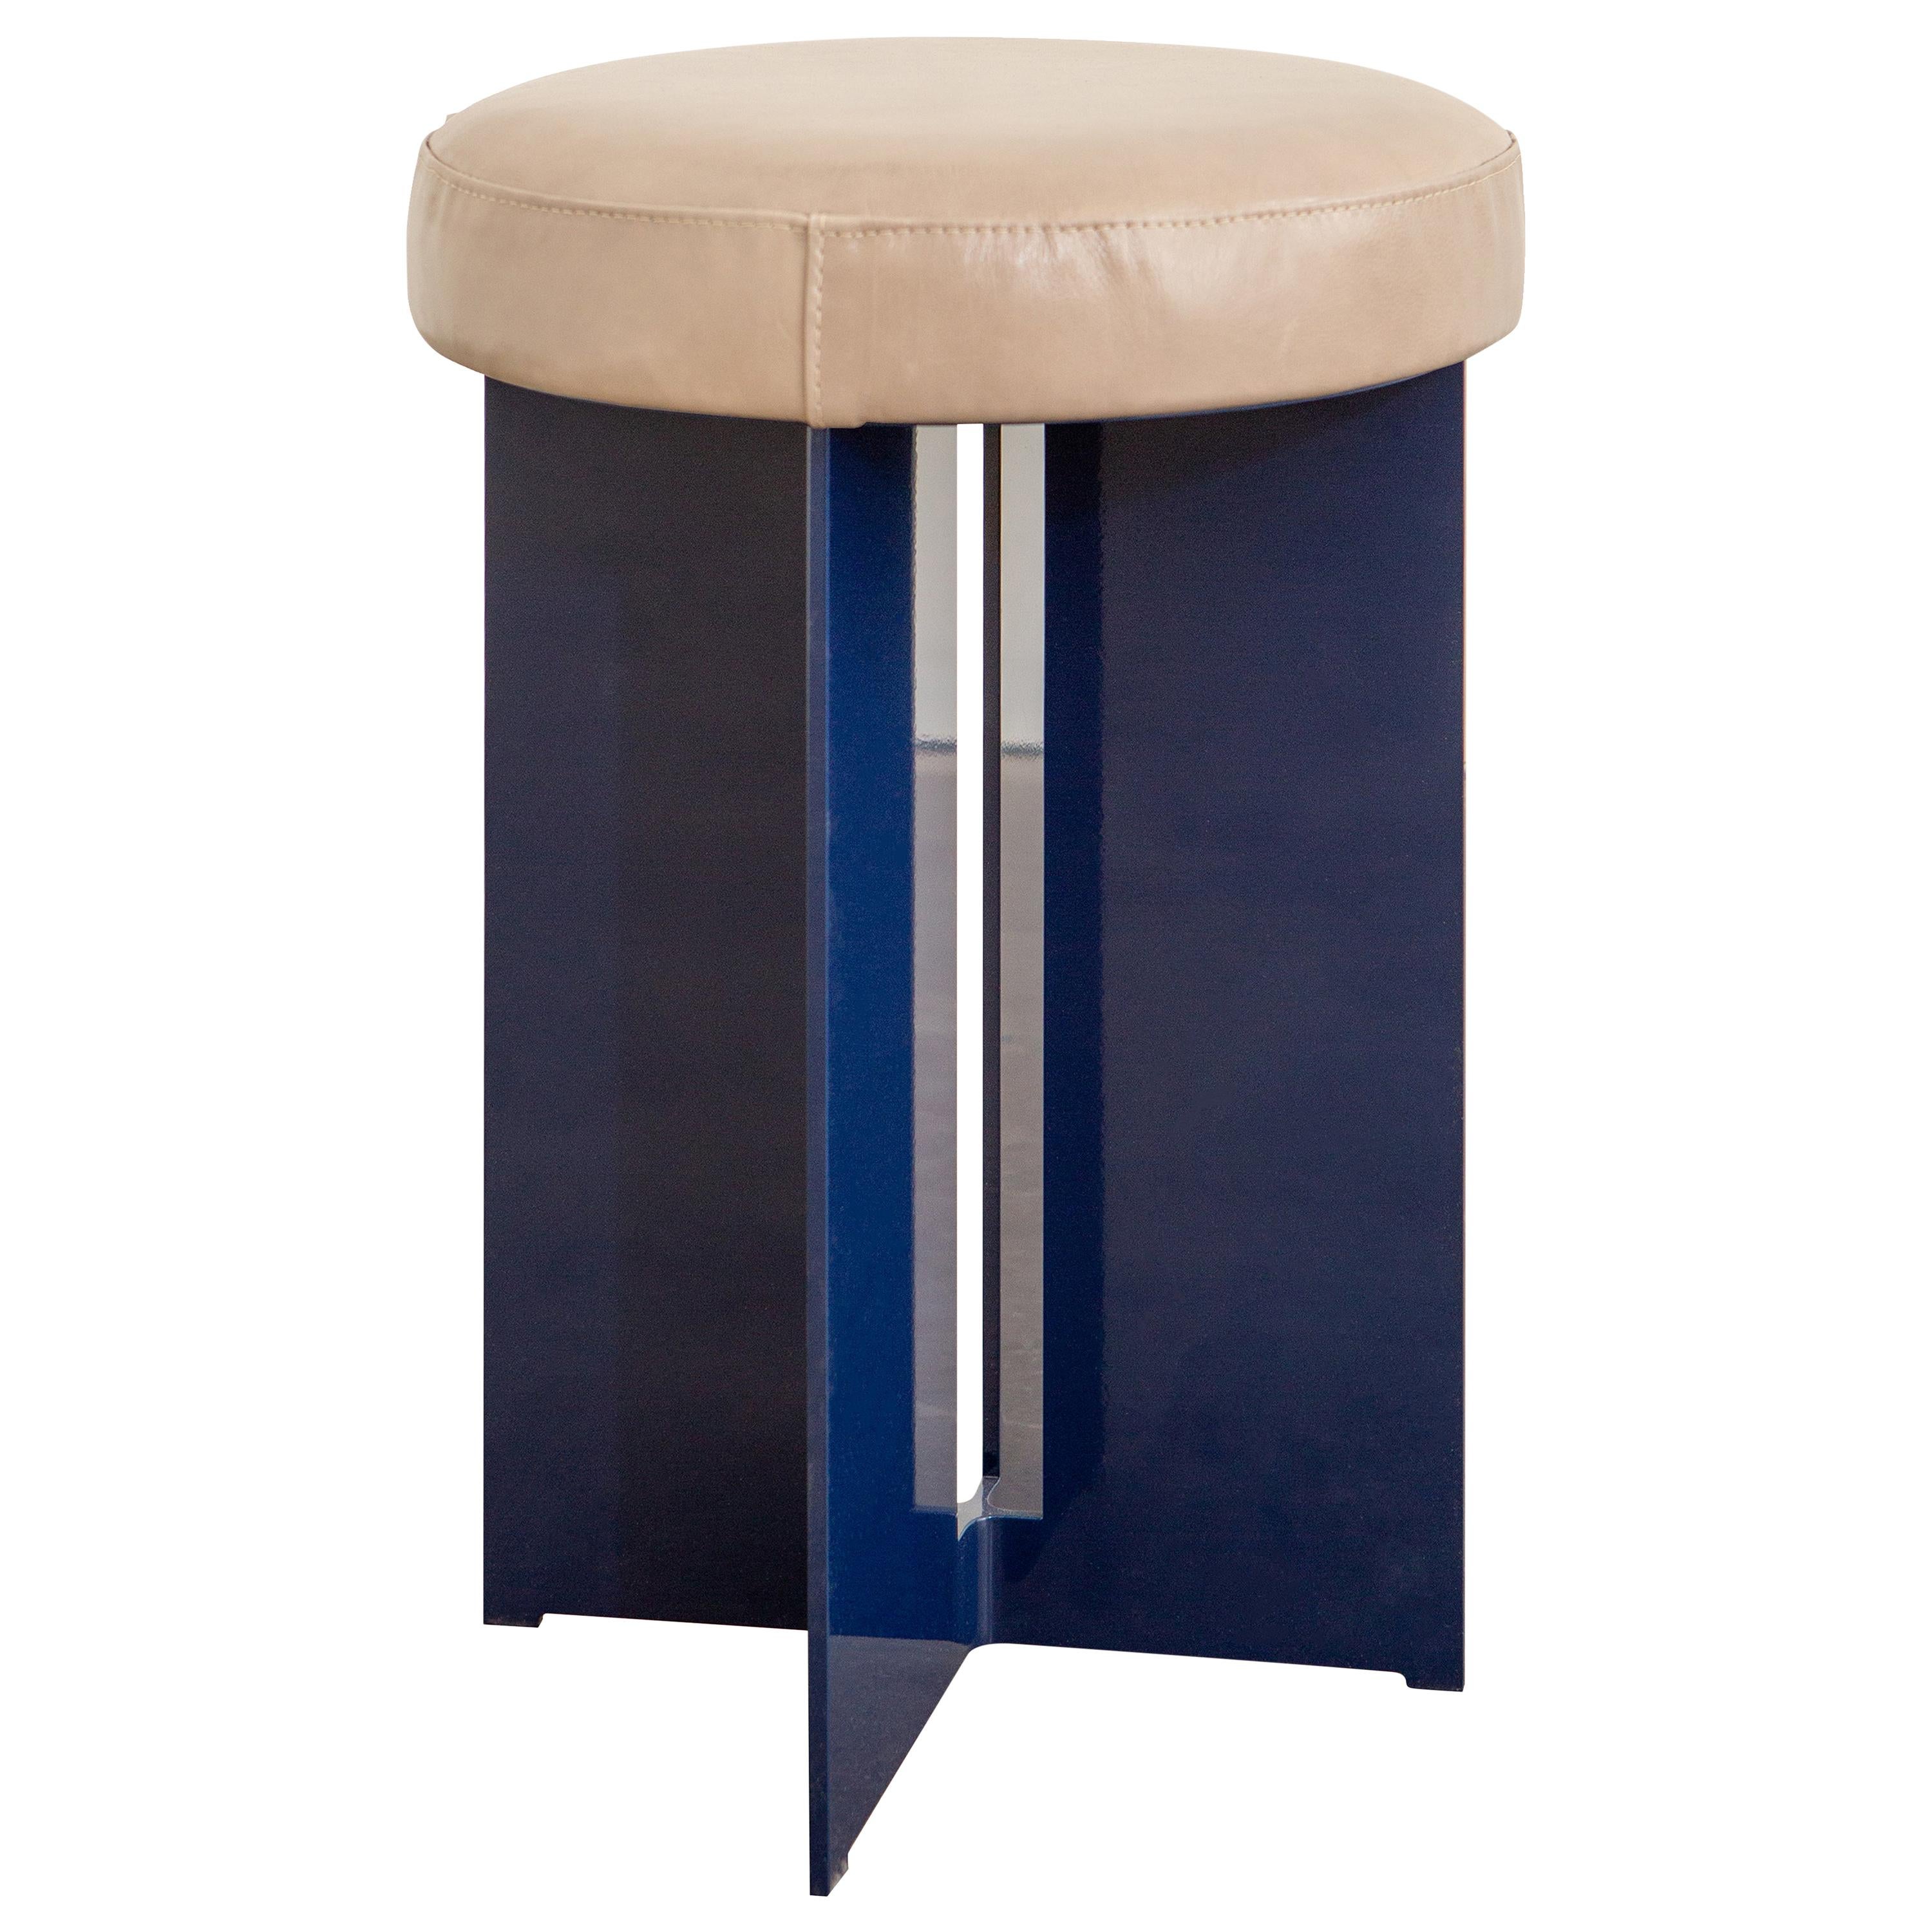 Mers Low Stool in Pacific Blue Aluminum with Upholstered Leather Seat For Sale